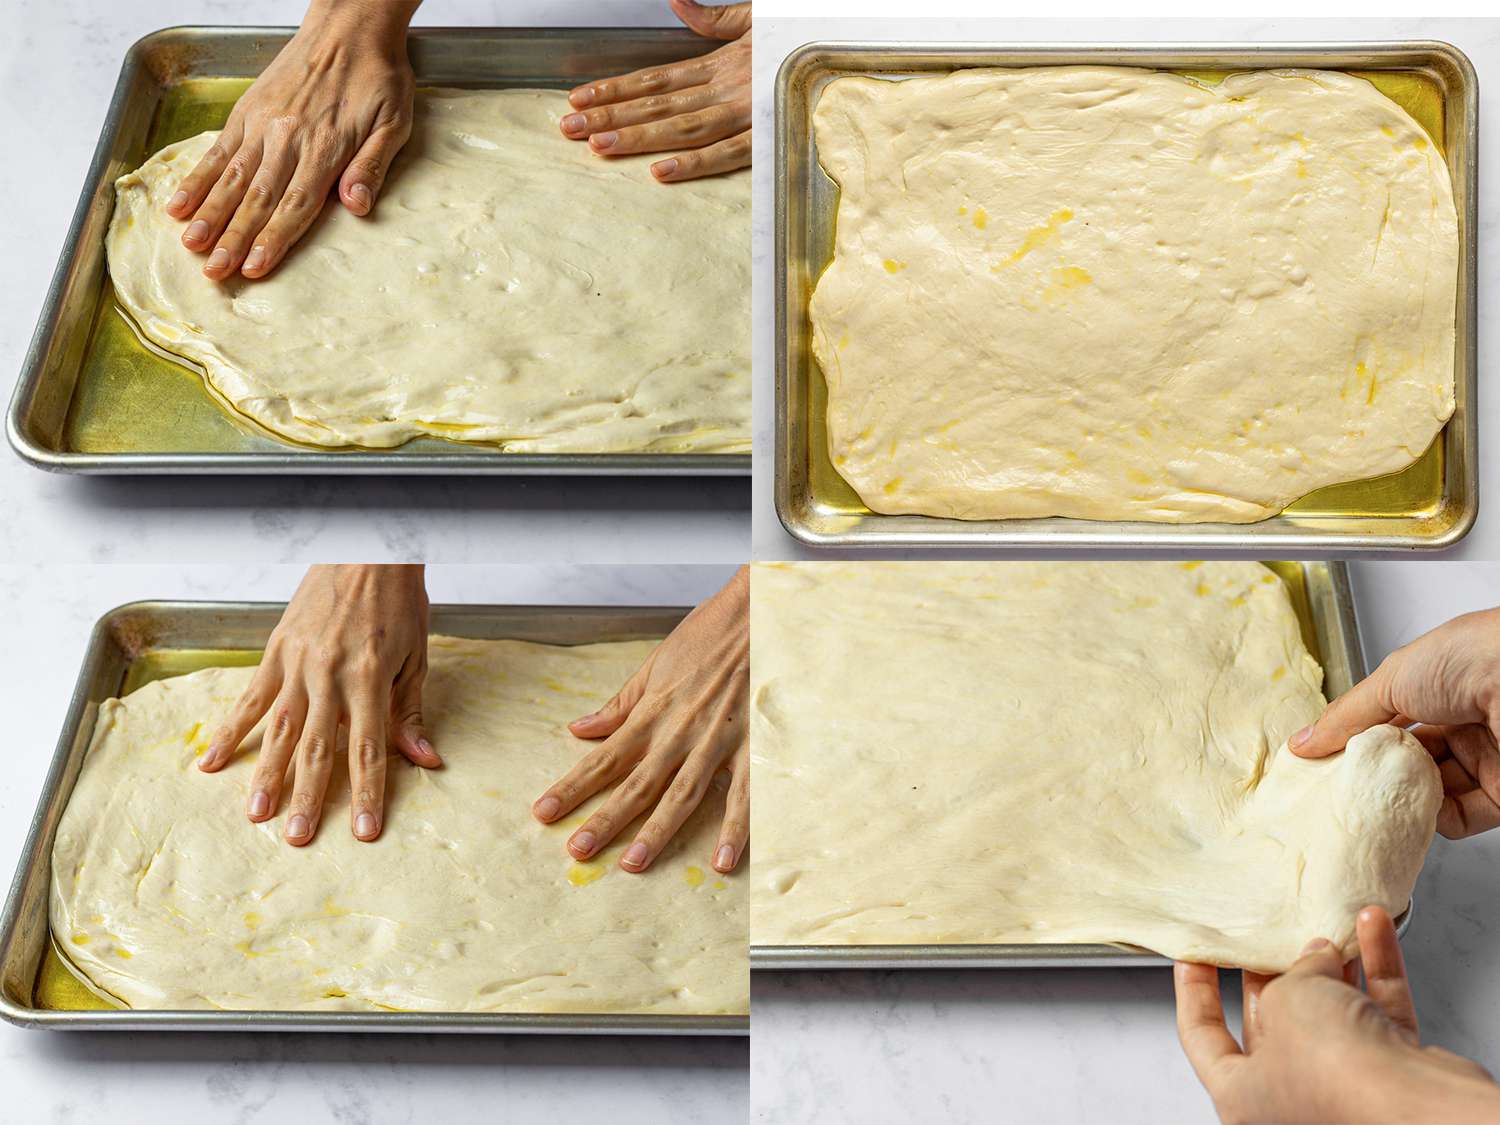 A four-image collage. The top left image shows two hands spreading oil-covered dough gently inside a rimmed, oil-coated baking sheet. The top right image shows the dough slackened and starting to spread out toward the edges of the baking sheet. The bottom left image shows two hands pressing the dough out from the center so that it fully fills the baking sheet. The bottom right image shows two hands lifting the bottom right corner of the dough and stretching it beyond the edge of the pan.